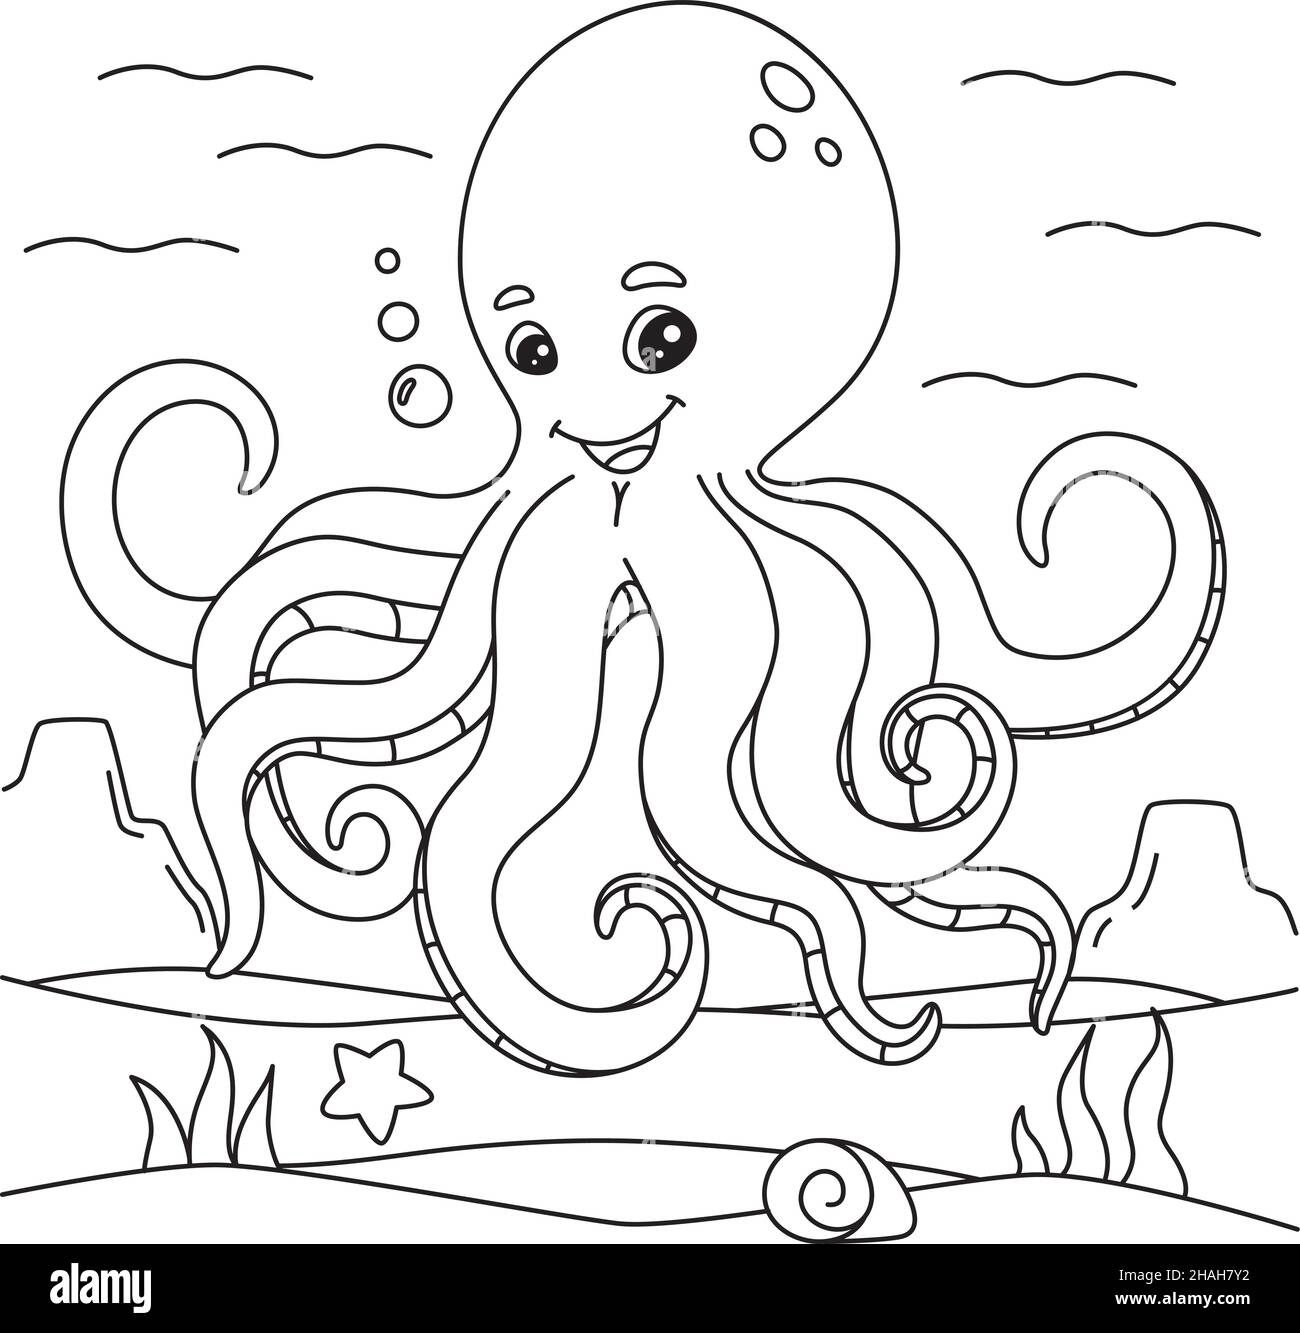 Octopus Coloring Page for Kids Stock Vector